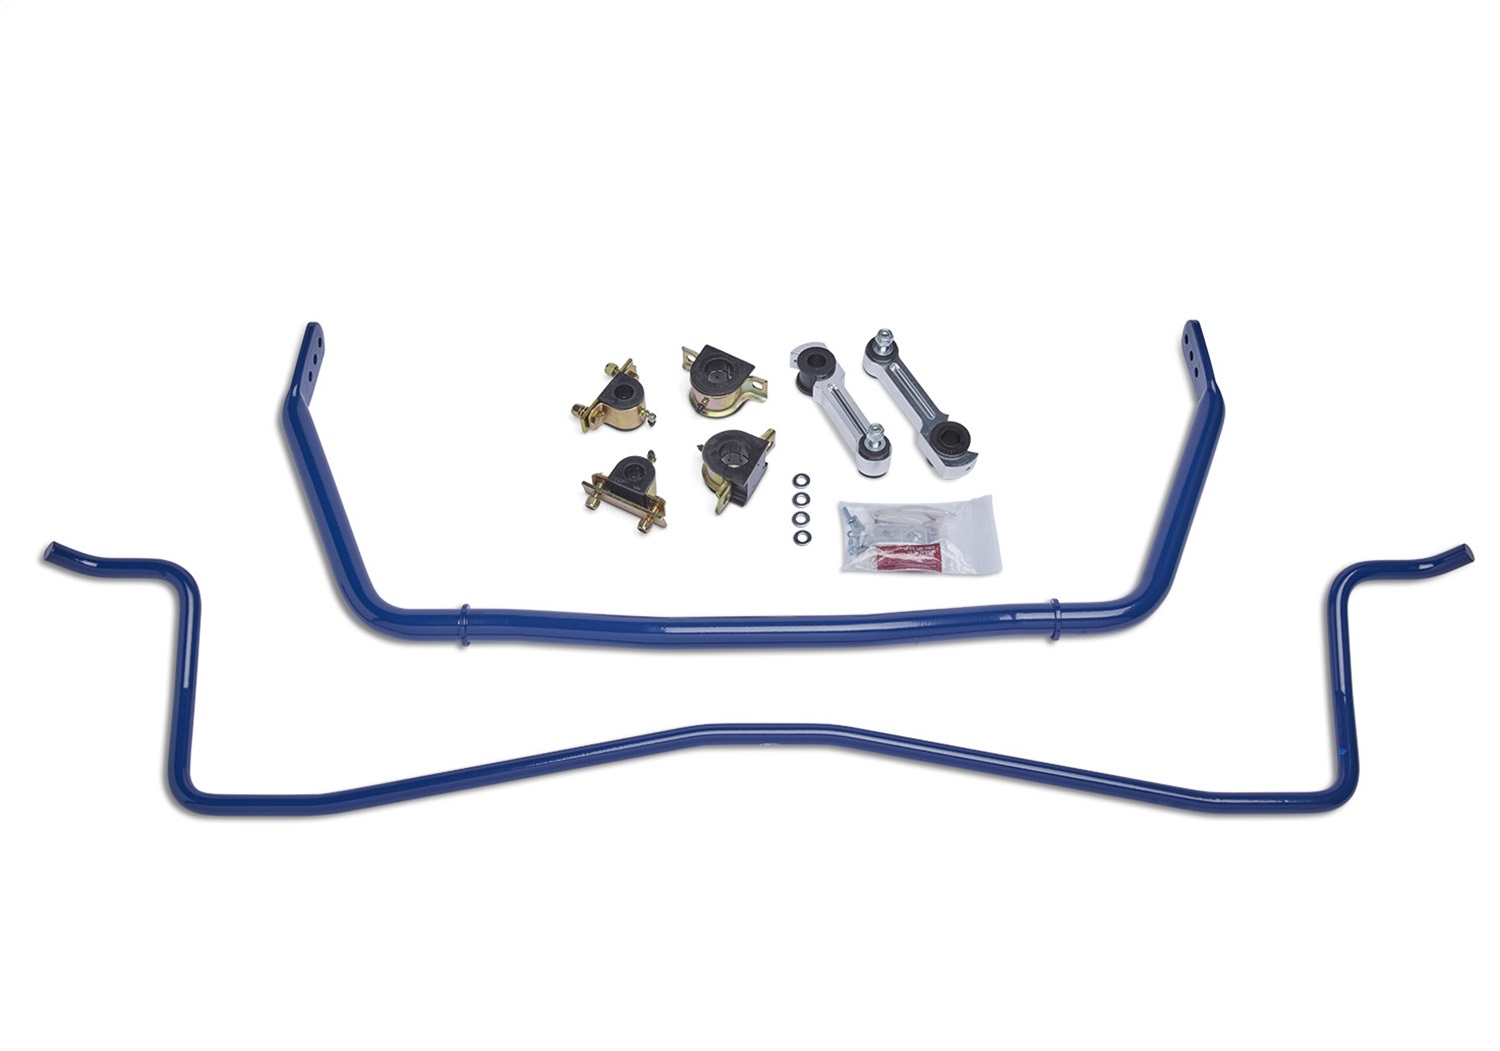 Ford Racing Ford Racing M-5490-A Anti-Roll Bar Kit Fits 11-14 Mustang